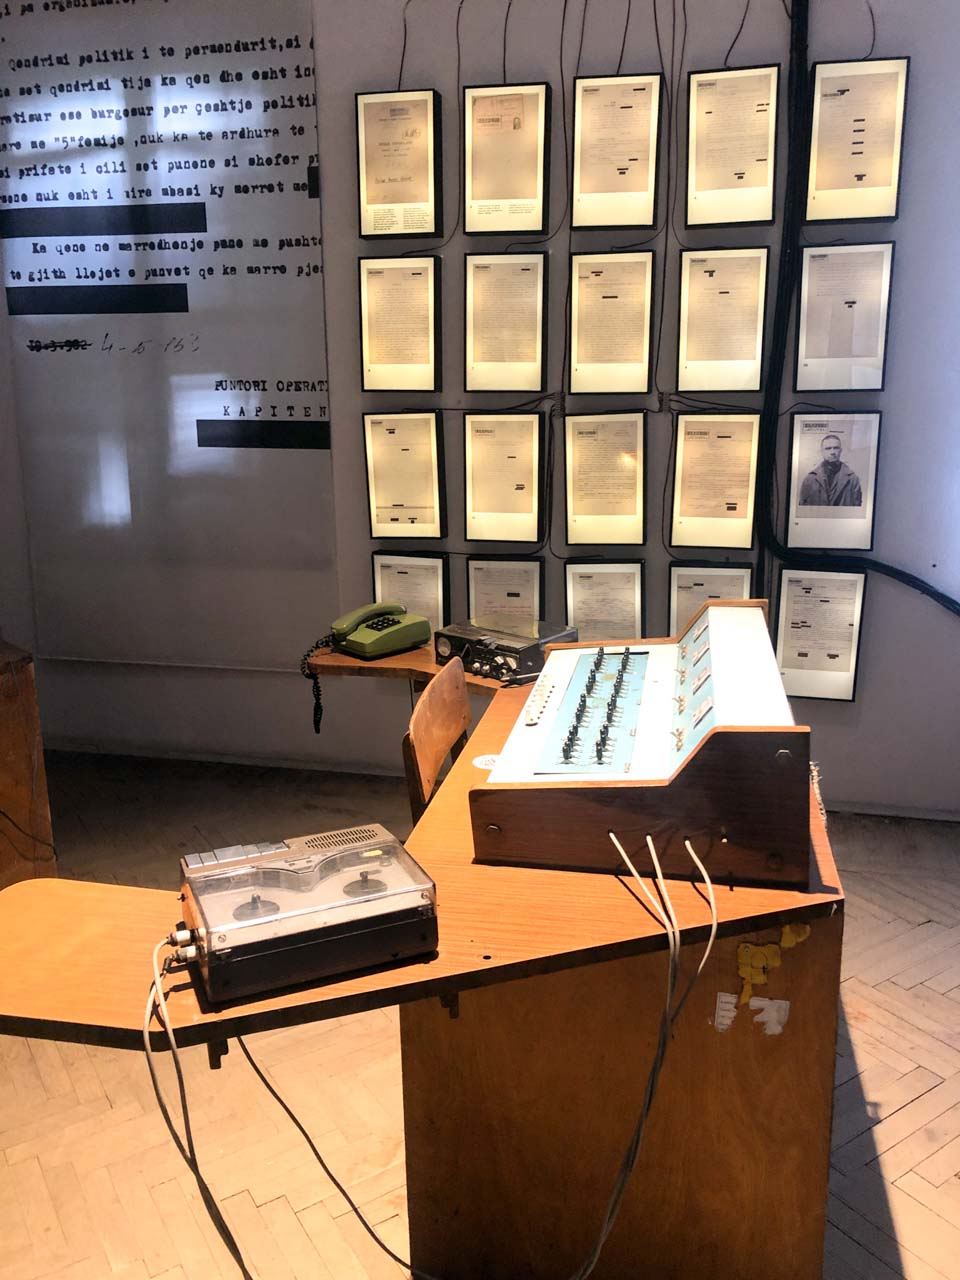 Room containing various equipment used to interrogate people on display at the House of Leaves in Tirana